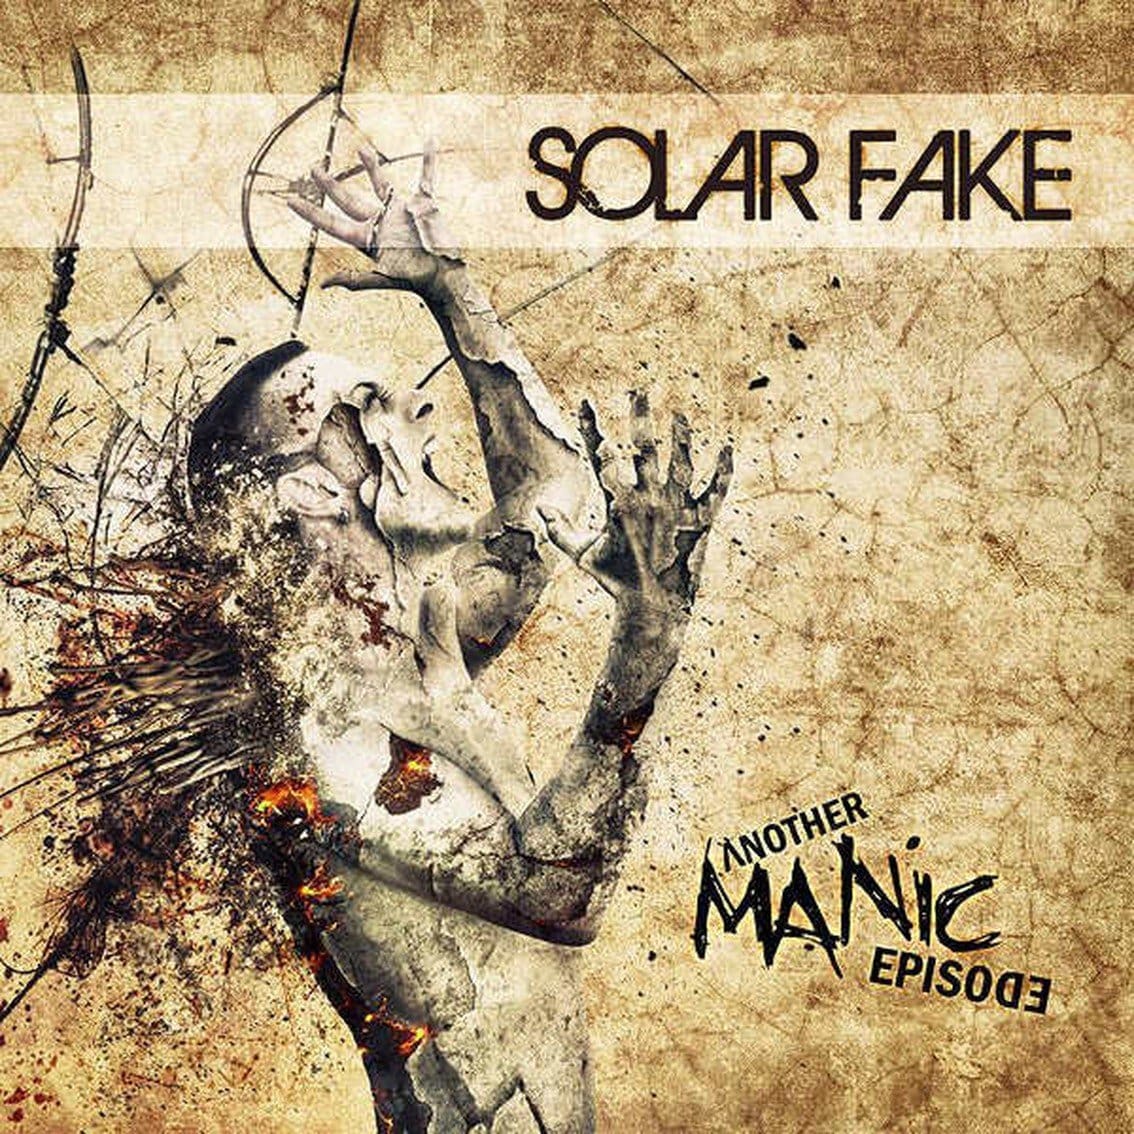 Solar Fake see 'Another Manic Episode' album released as 1CD, 2CD and 3CD set